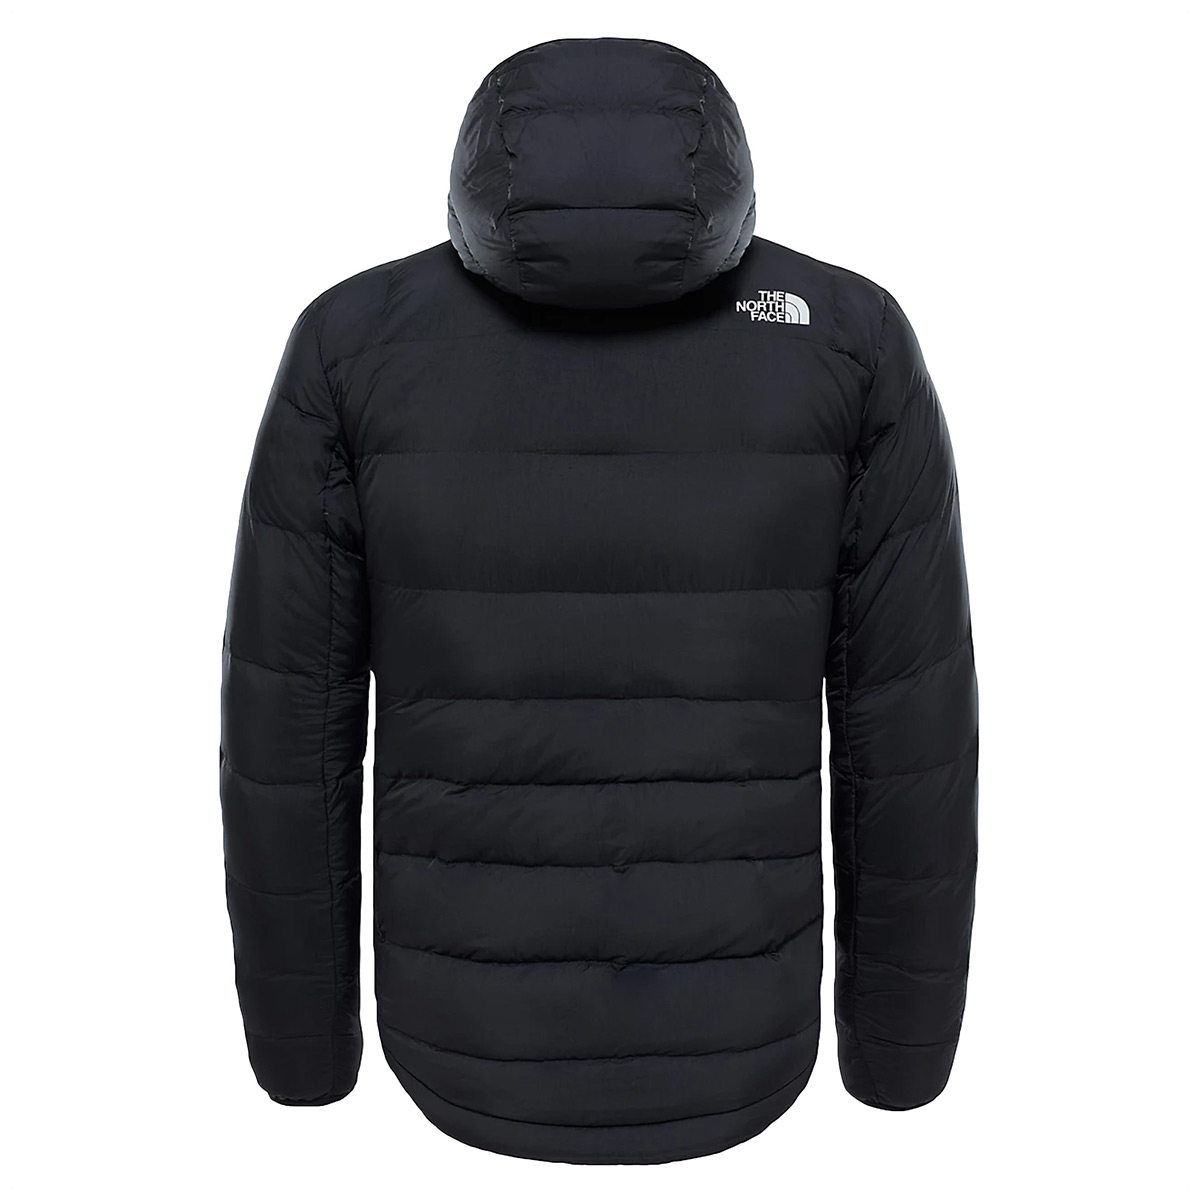 the north face la paz hooded jacket review